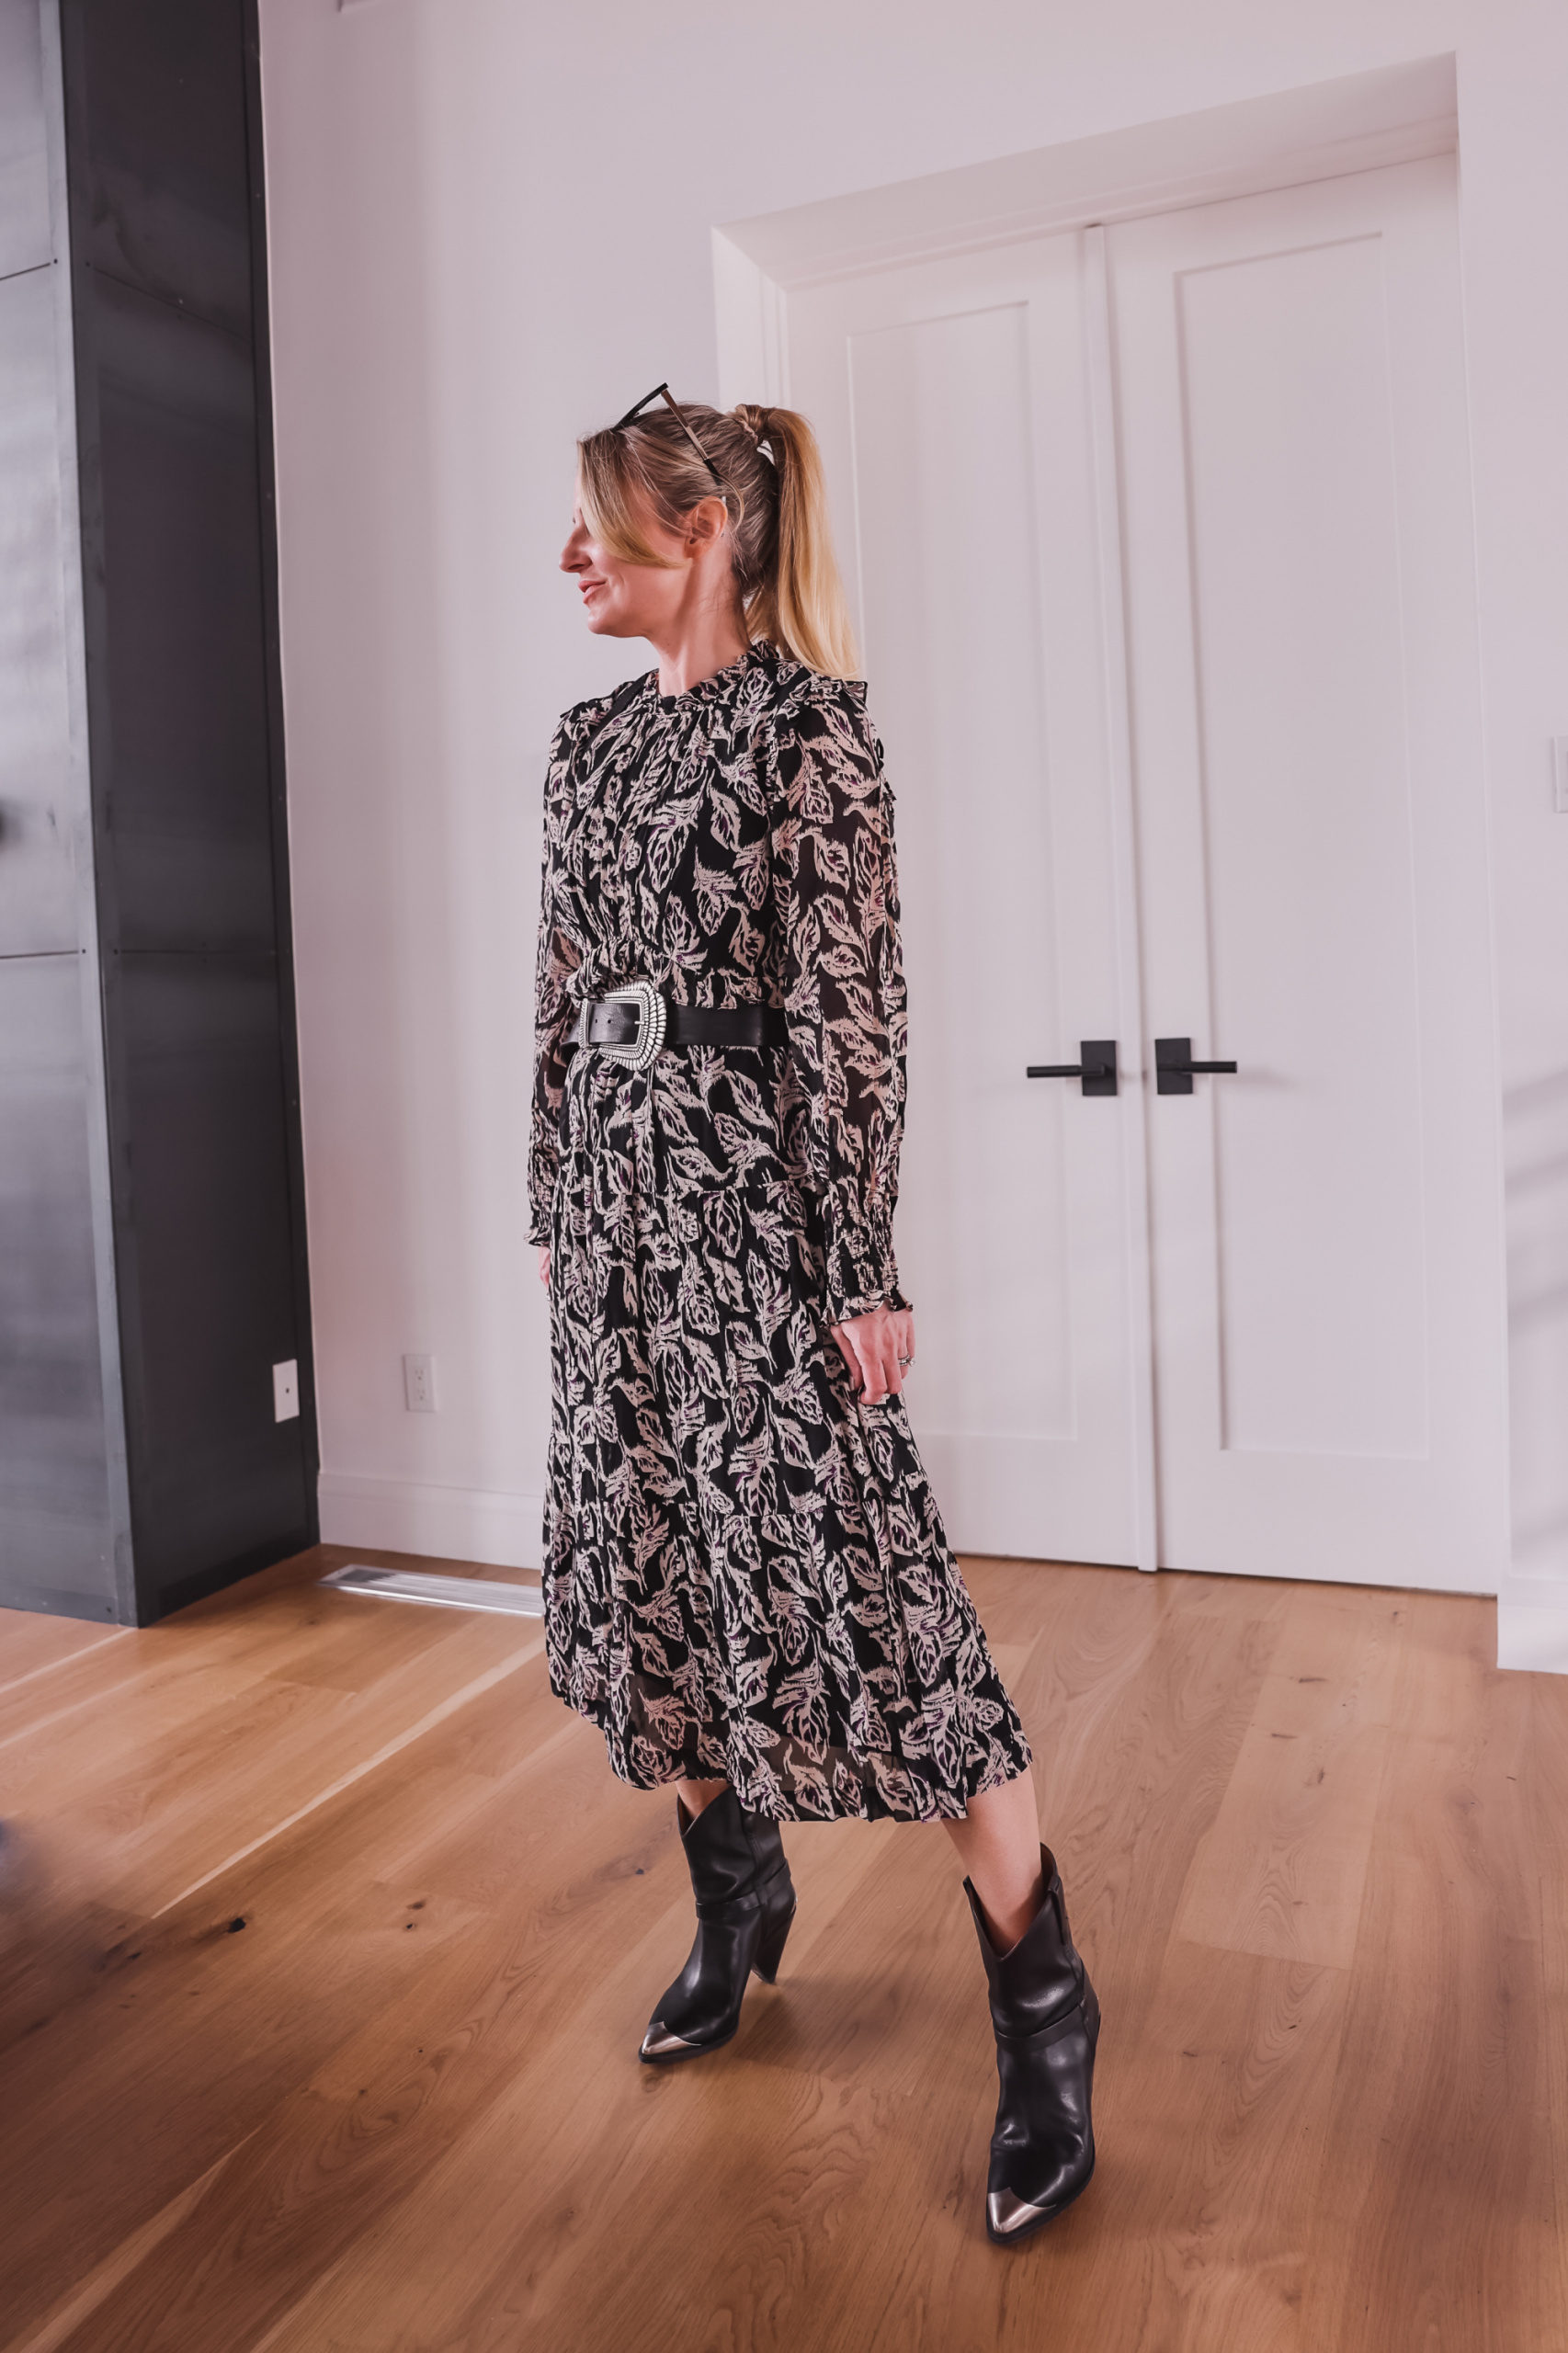 Floral Midi Dress with Heeled Ankle Boots | Ways to Wear Boots with a Dress This Winter